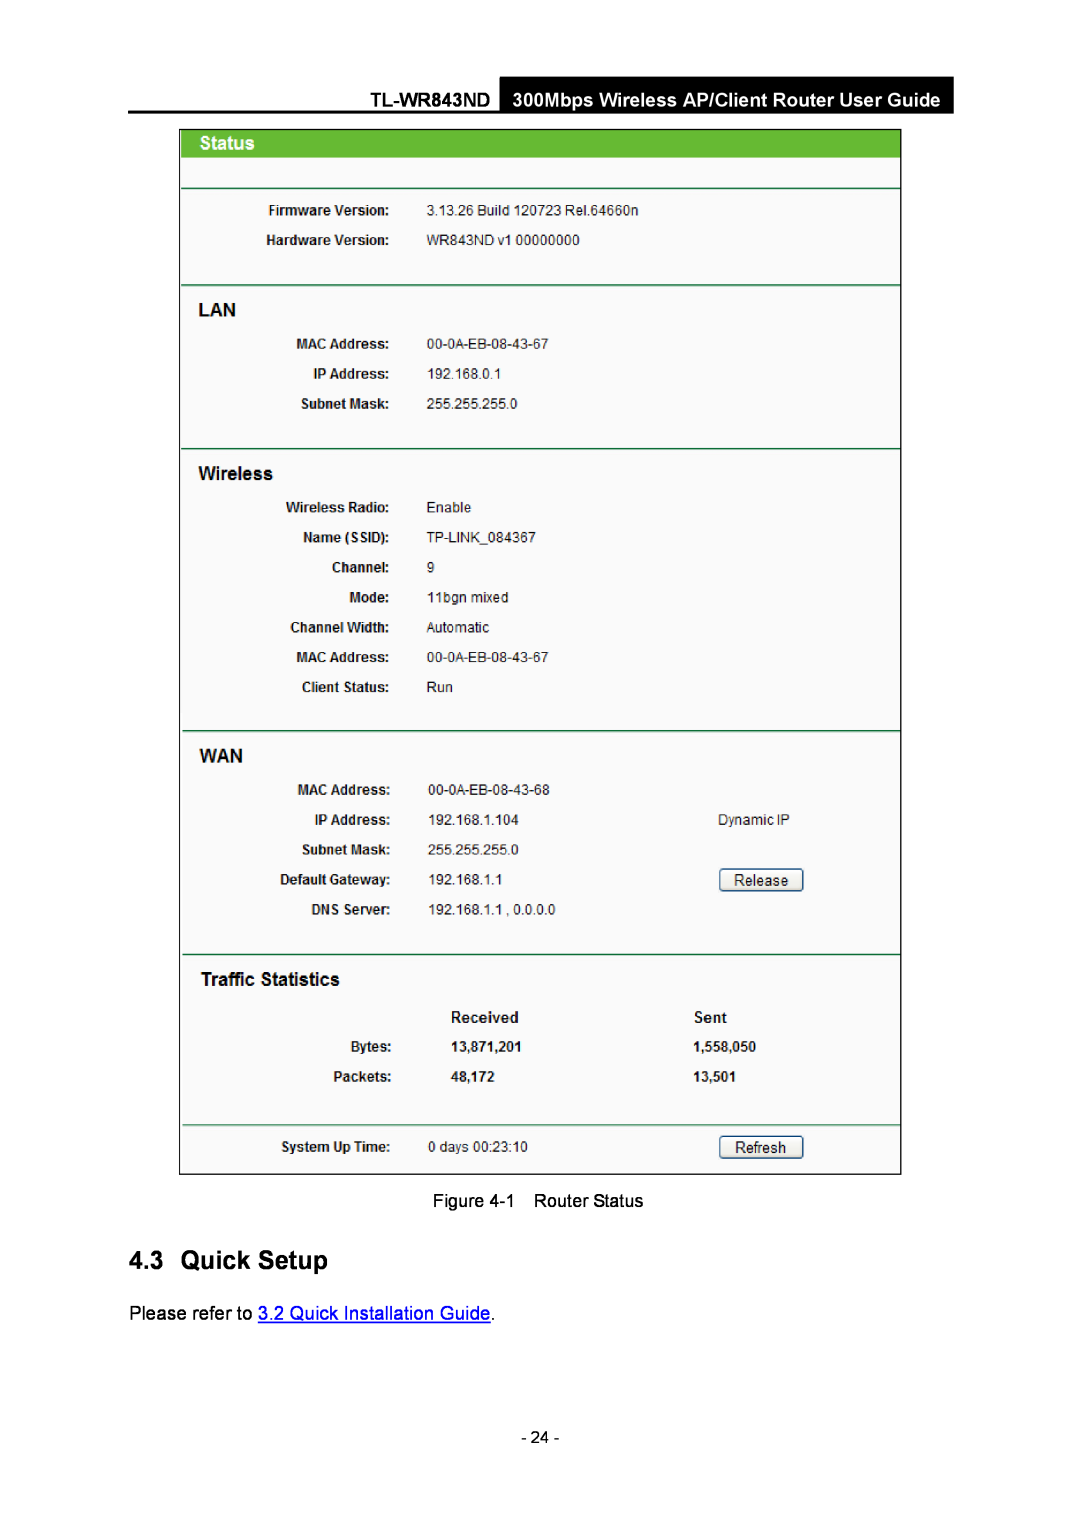 TP-Link TL-WR843ND manual Quick Setup, Please refer to 3.2 Quick Installation Guide, 1 Router Status 